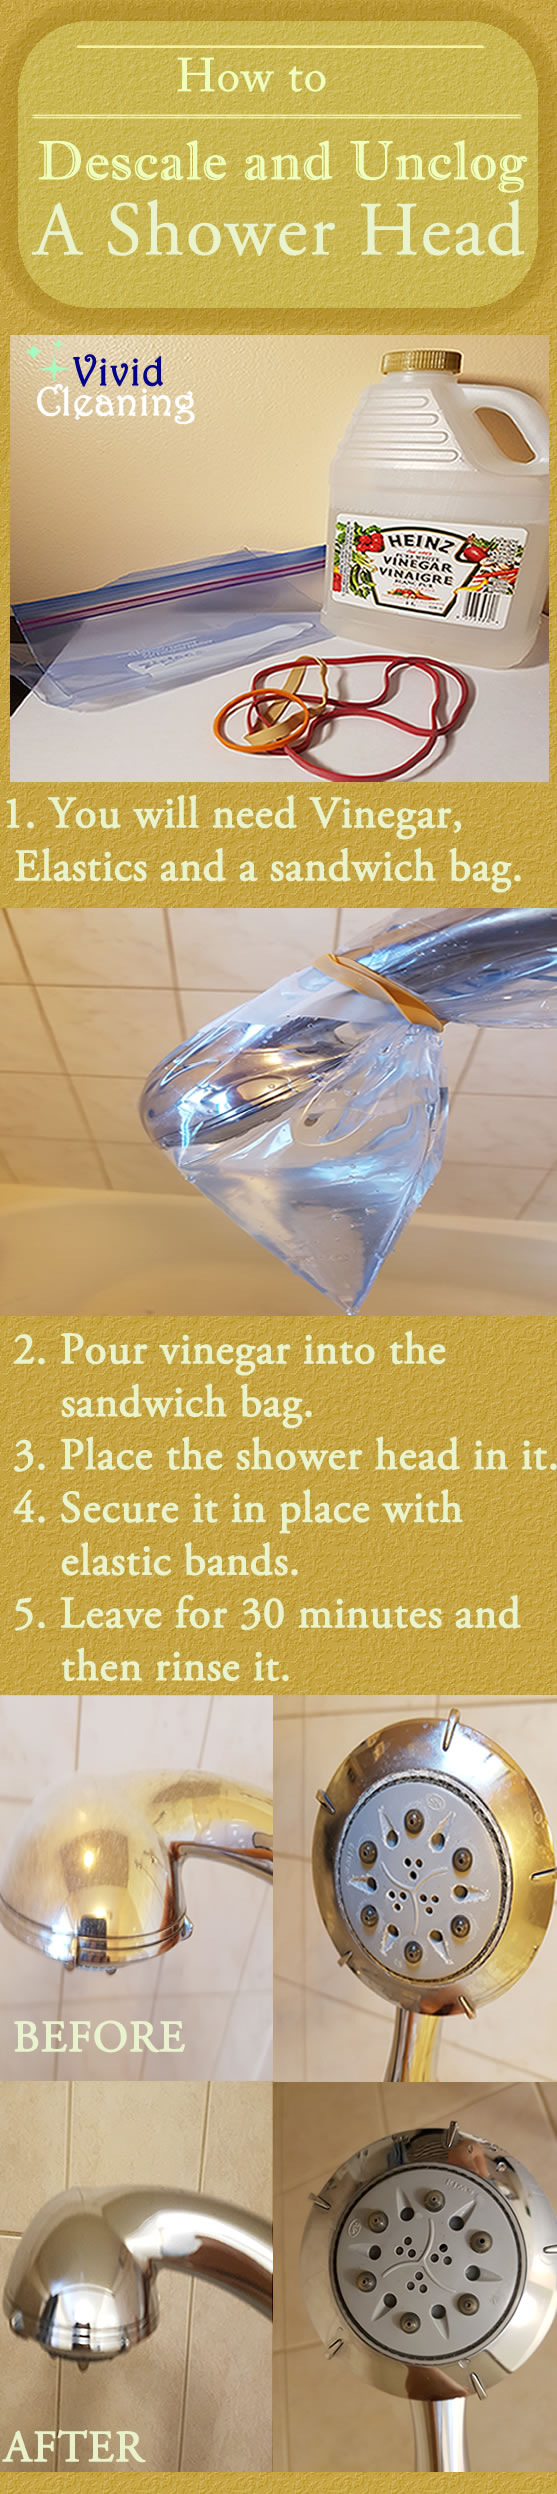 How to Descale and Unclog A Shower Head 1. You will need Vinegar, Elastics and a sandwich bag. 2. Pour vinegar into the sandwich bag. 3. Place the shower head in it. 4. Secure it in place with elastic bands. 5. Leave for 30 minutes and then rinse it.